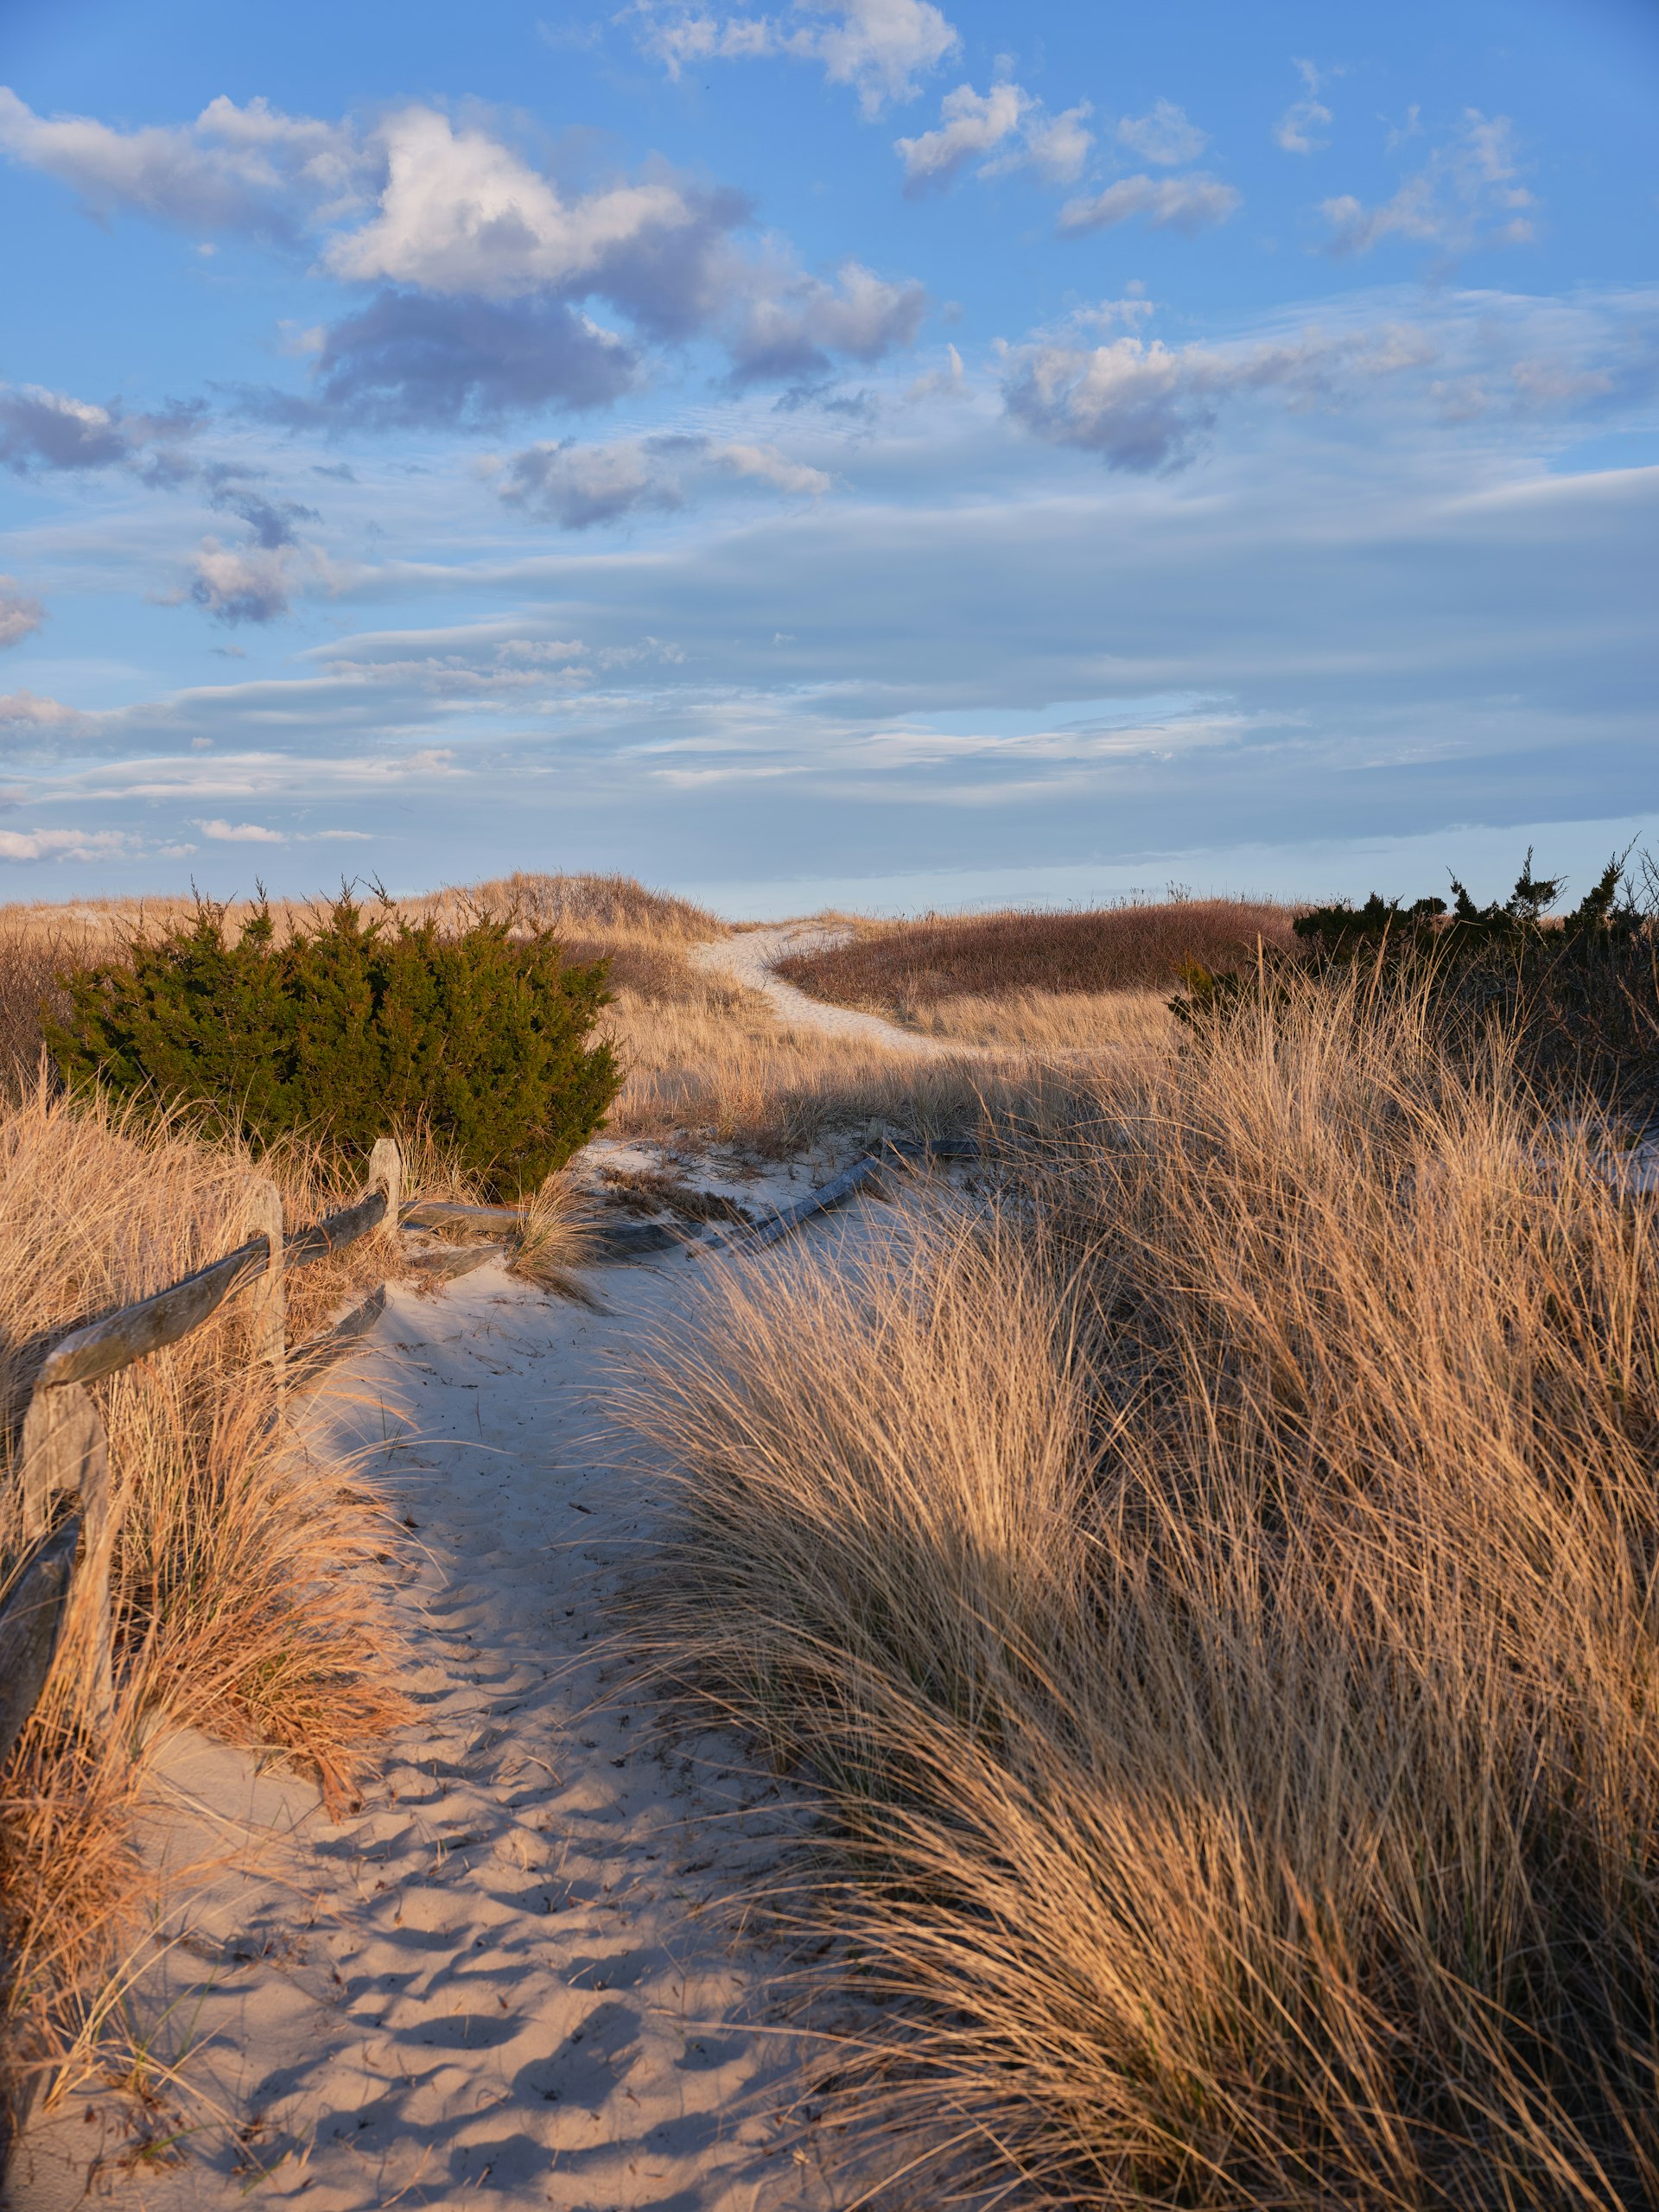 A path leading through sand dunes at sunset